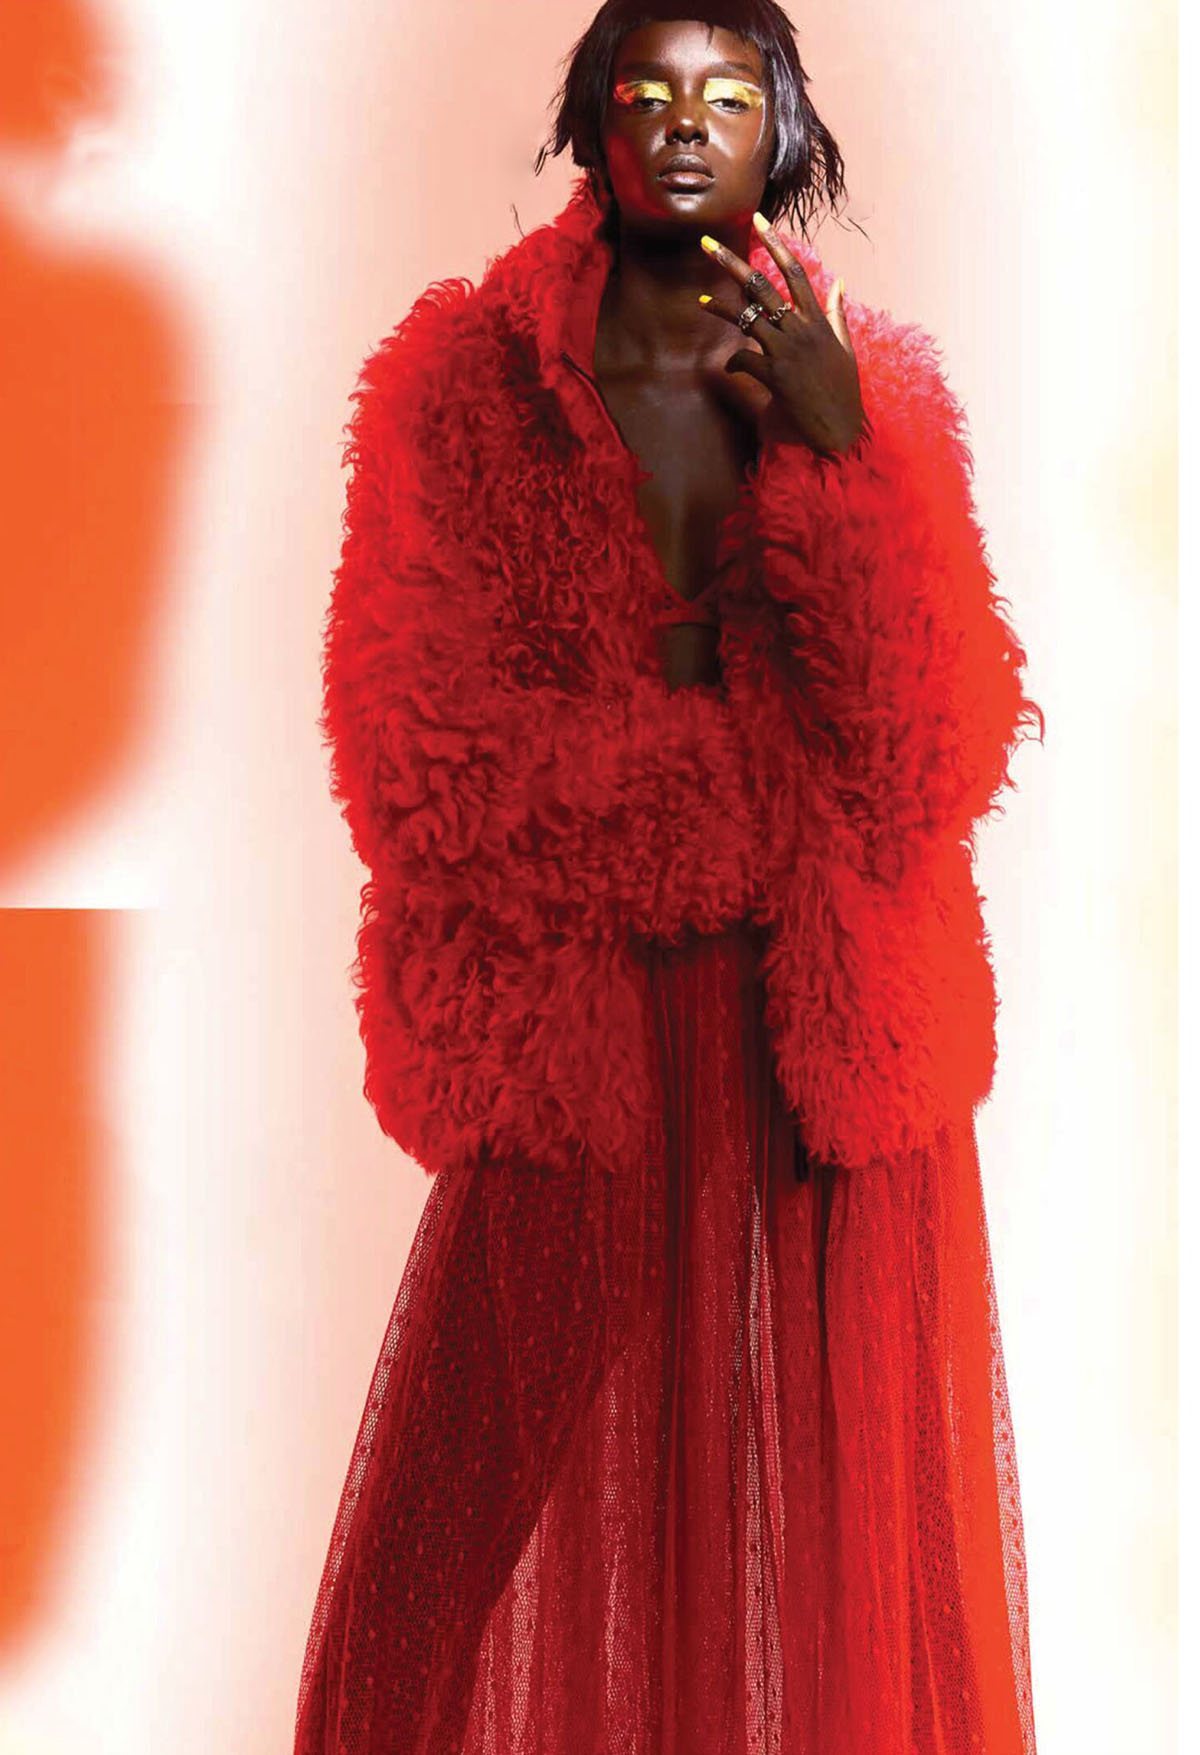 Duckie Thot by Simon Eeles for Marie Claire Australia July 2021